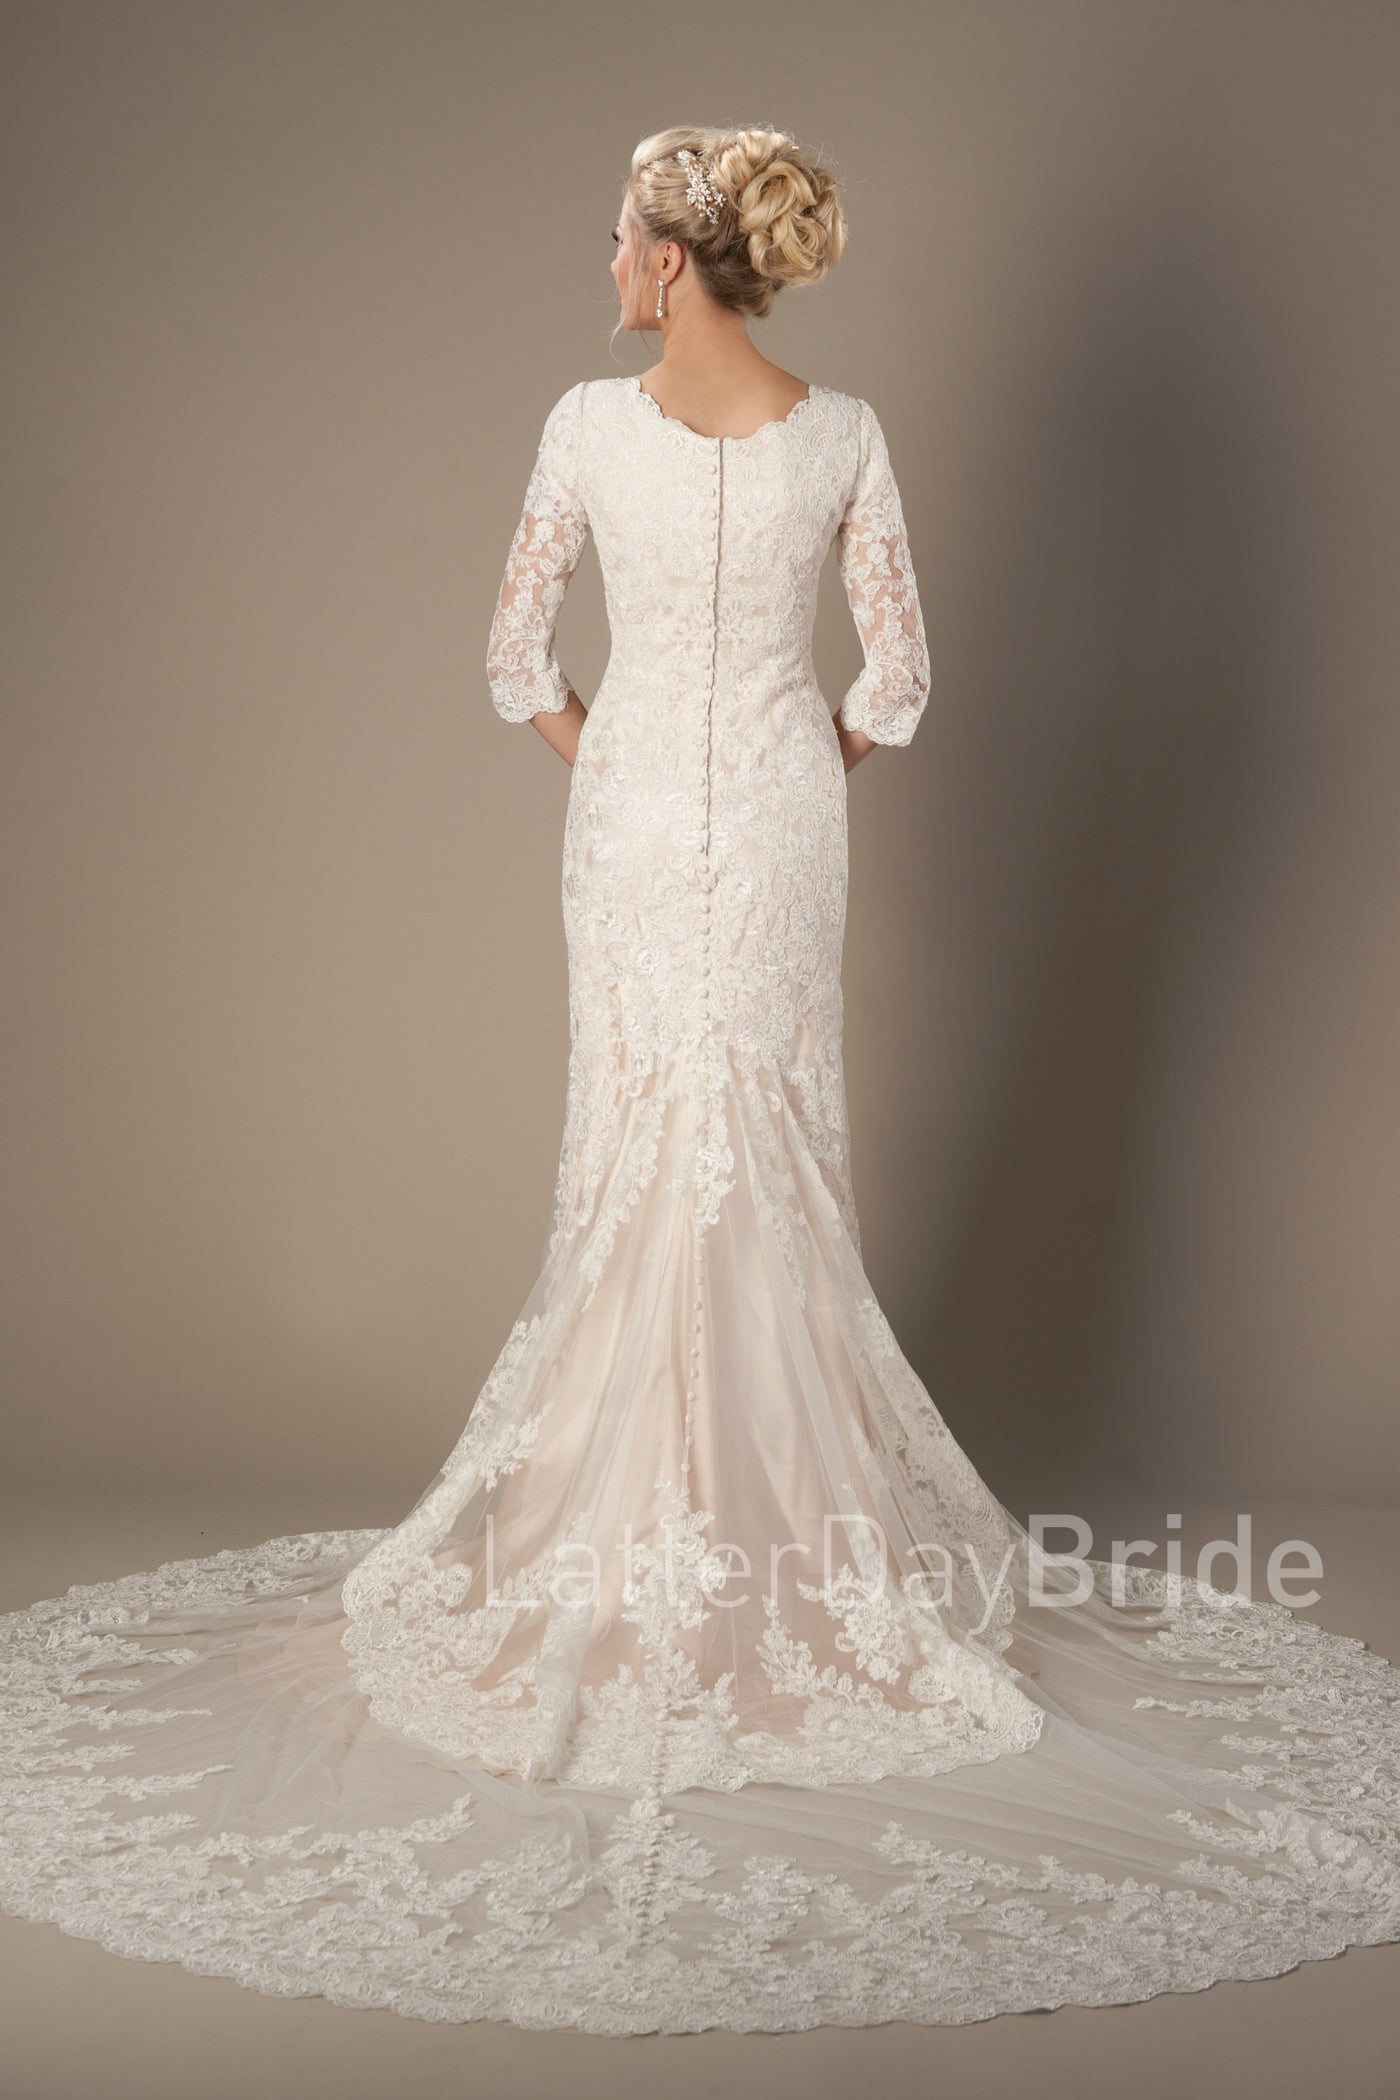 Back of Modest wedding gown with illusion lace sleeves, style Romero, is part of the Wedding Collection of LatterDayBride, a Utah Wedding Shop. 